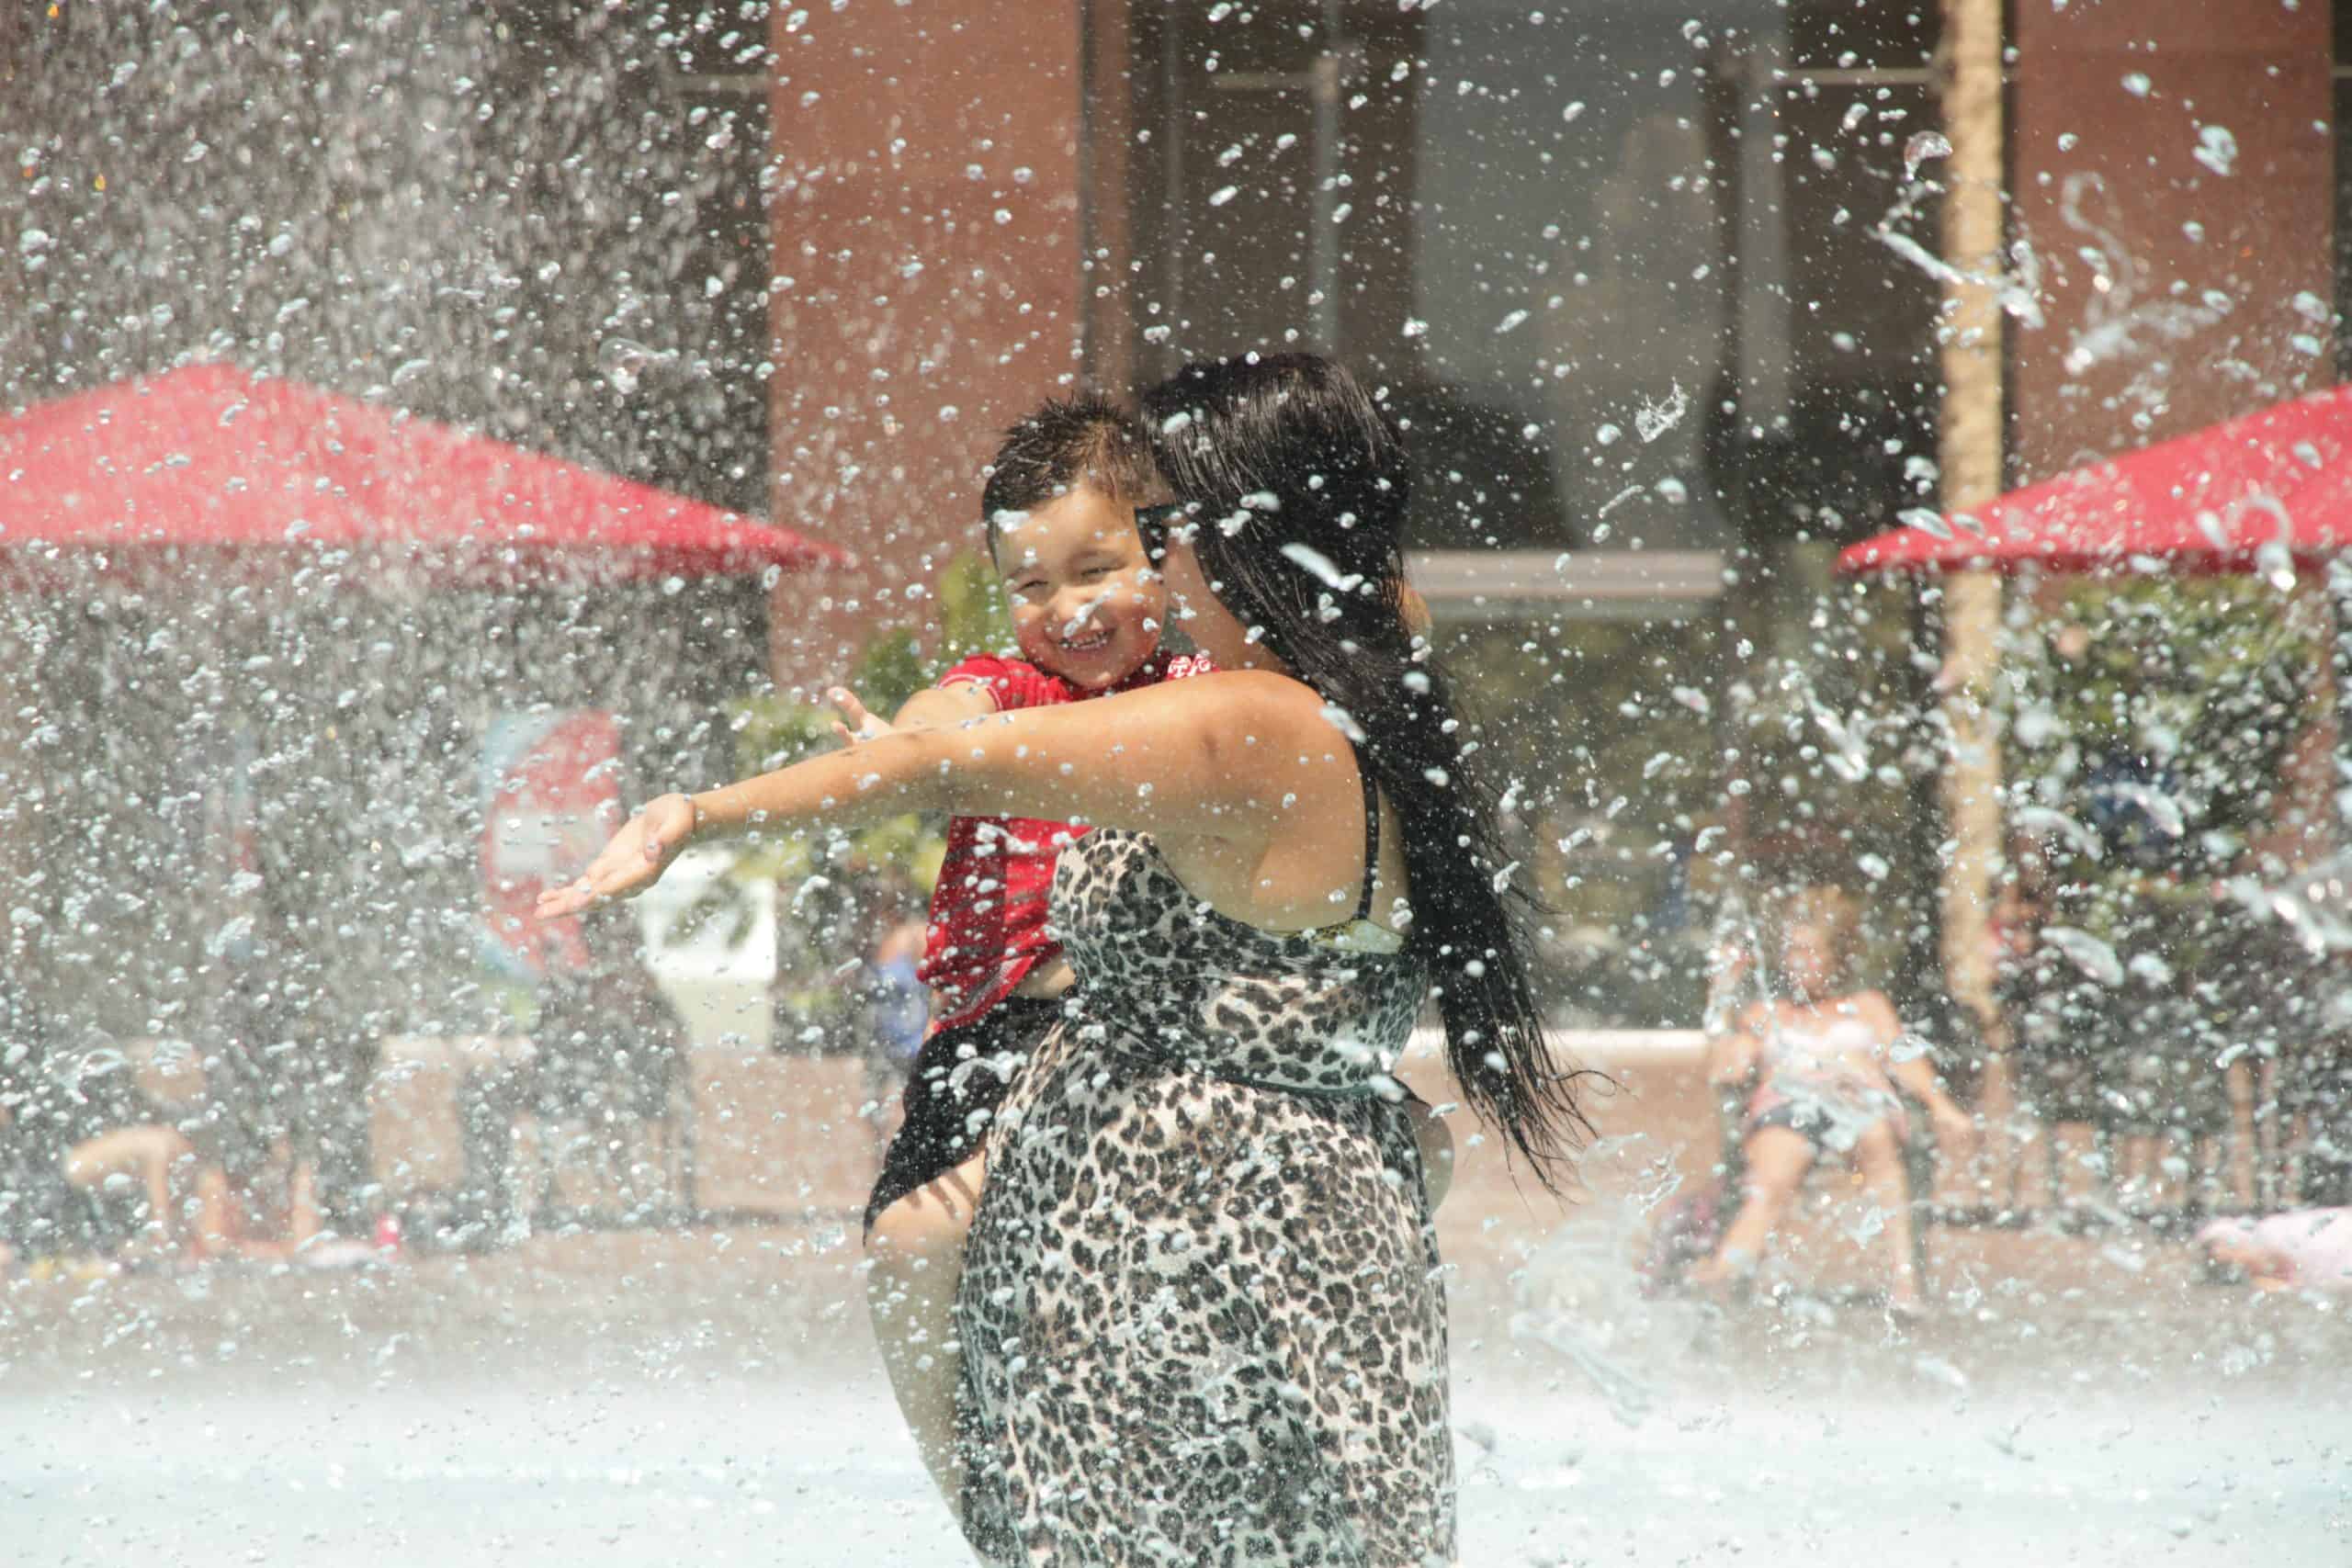 Image of people splashing in a fountain on a summer day